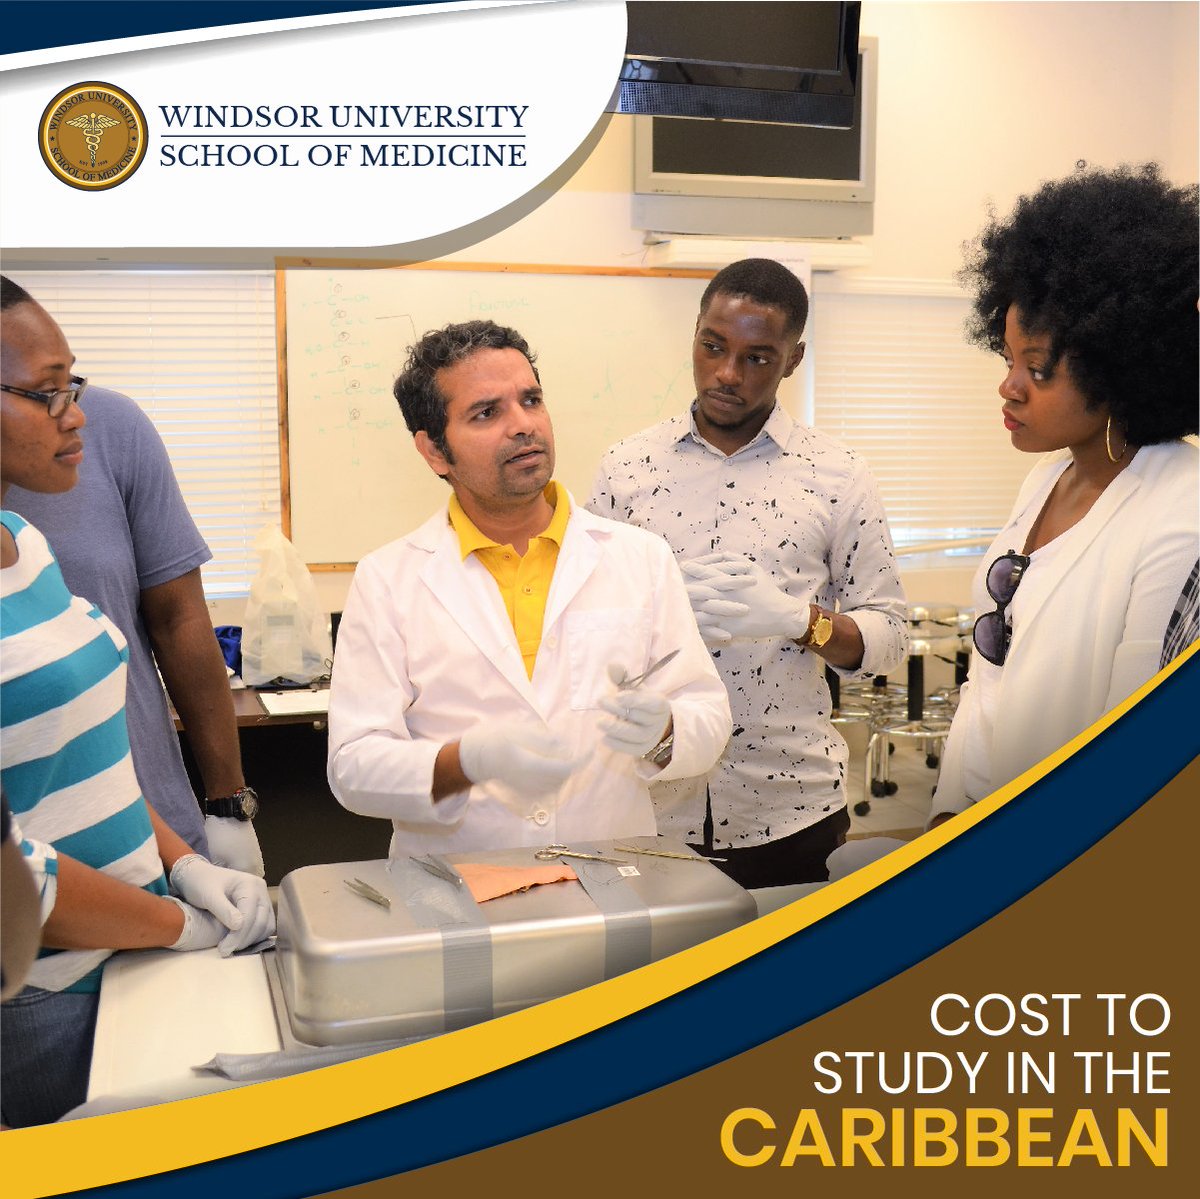 Our Caribbean medical school is clearly the best choice for students who desire a world-class medical education that they can afford.

bit.ly/2SID73W

#tuition #fee #costofstudying #costofstudy #studyabroad #seemycity #travel #studyabroadbecause #wanderlustwednesday #med